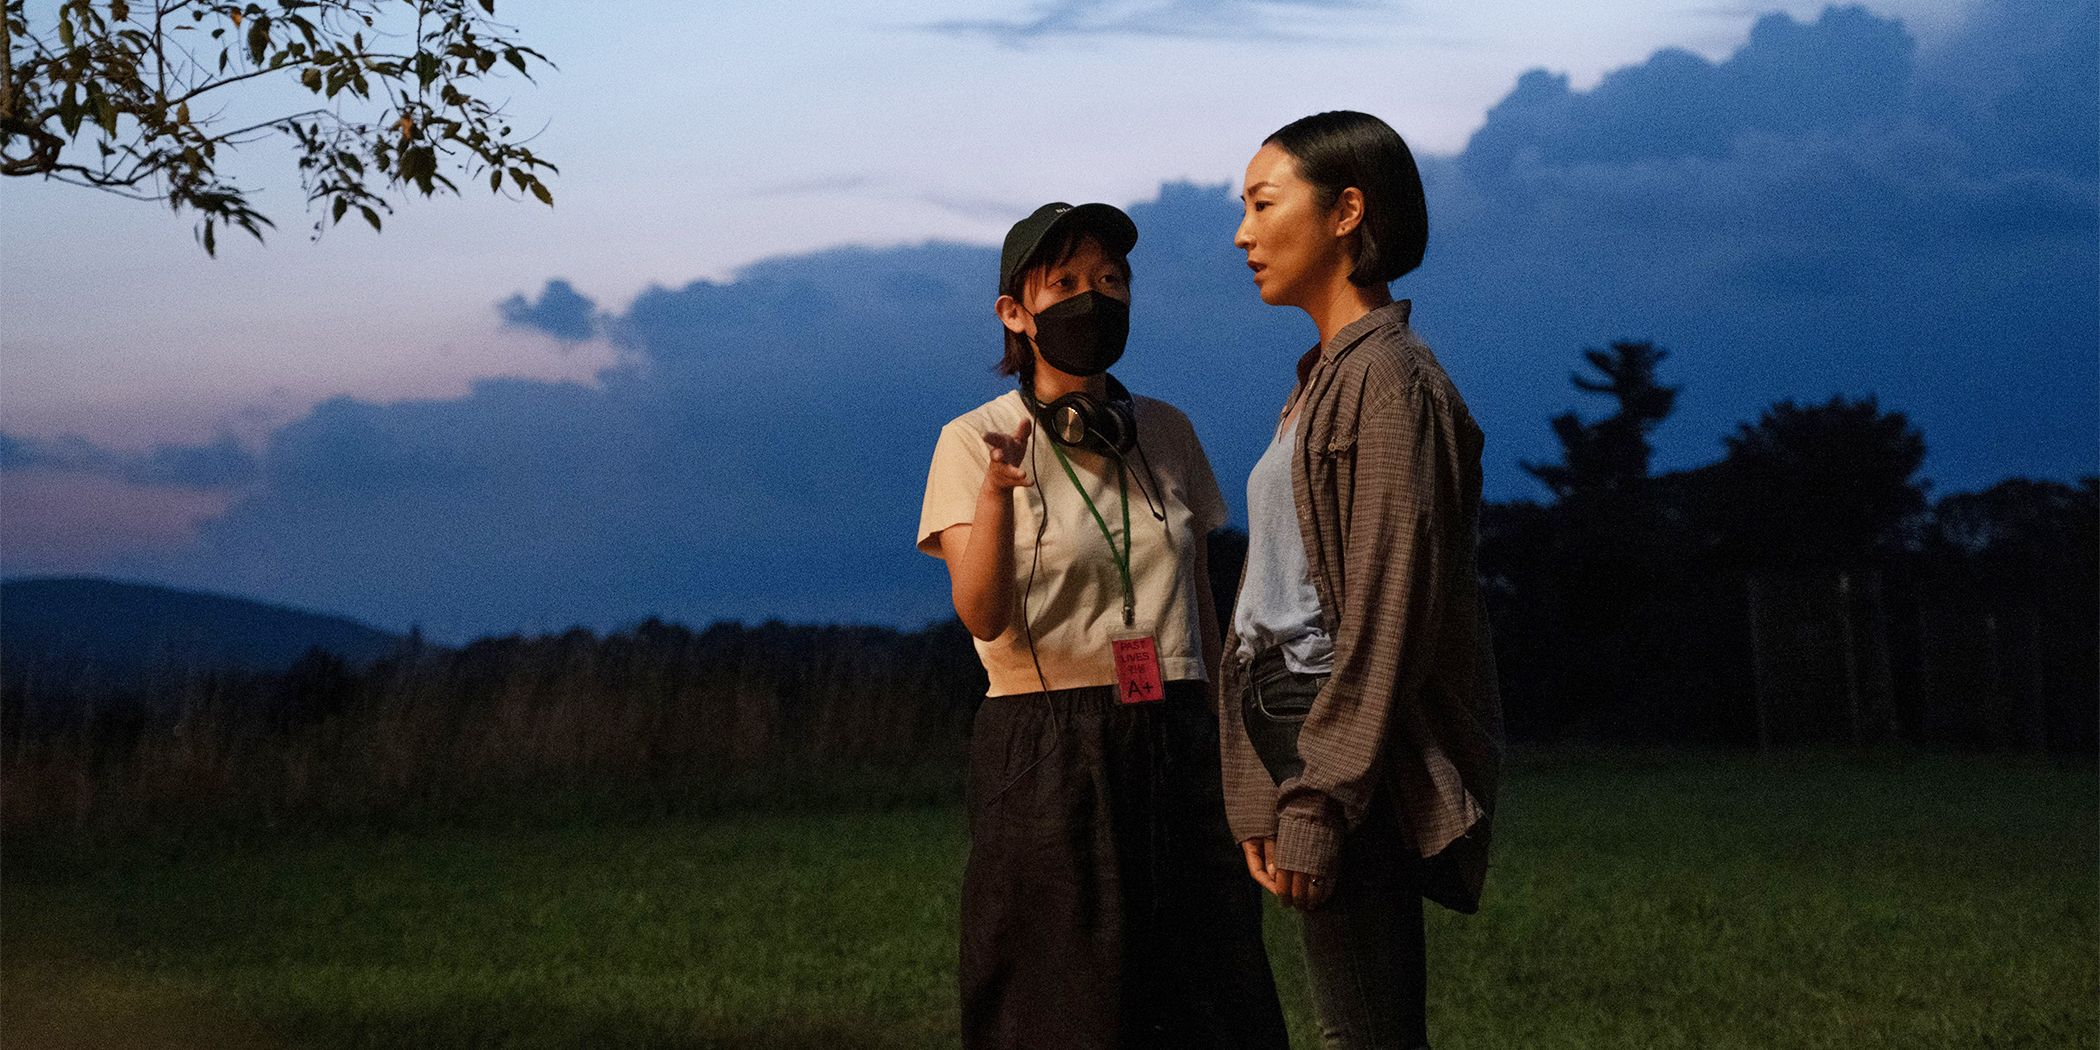 Director Celine Song speaking to Greta Lee as Nora in a field at sunset for Past Lives